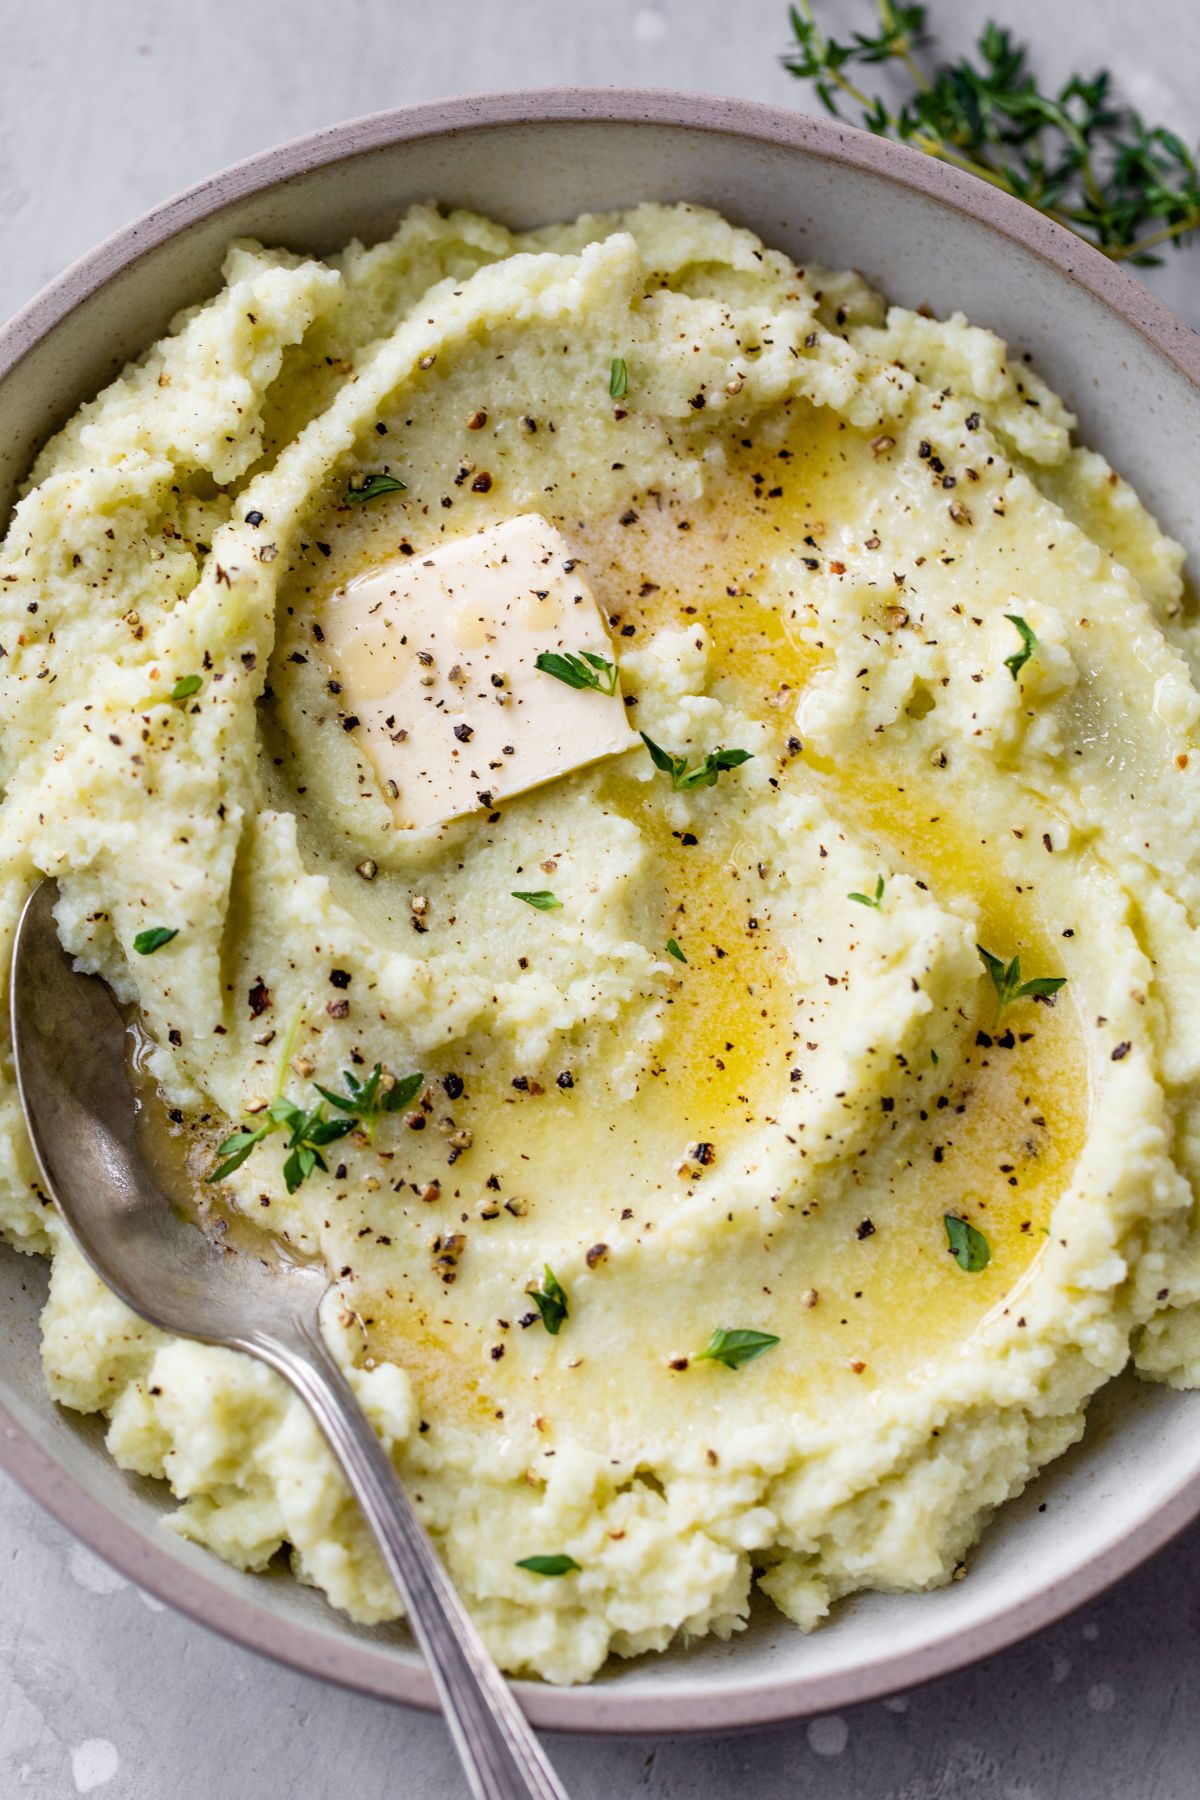 Mashed cauliflower in a bowl with a large serving spoon.